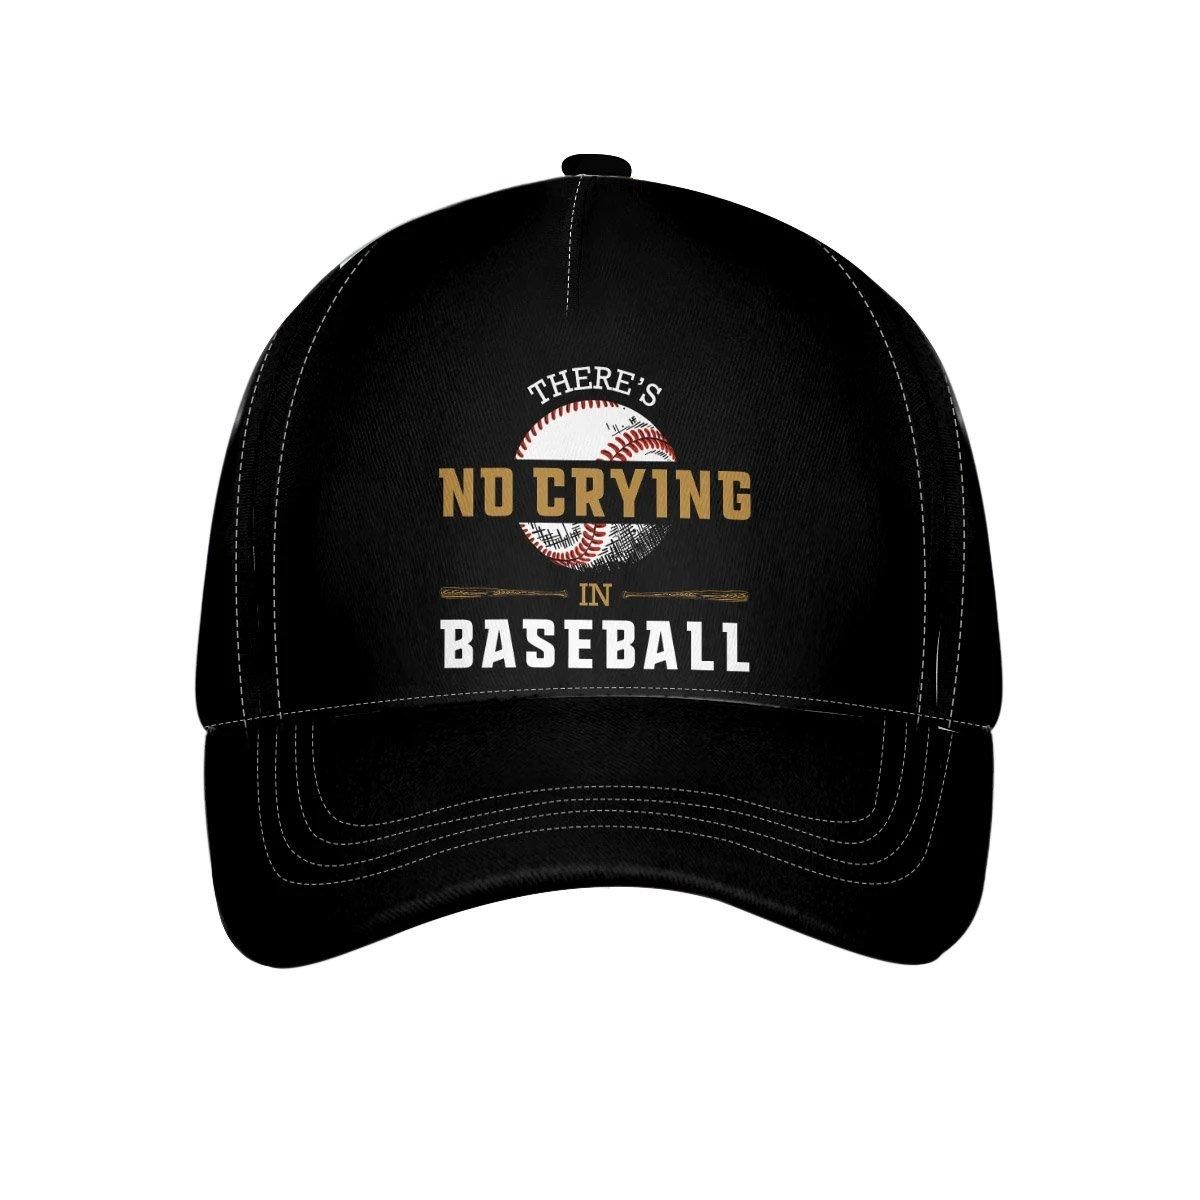 There'S No Crying In Baseball Black Cap